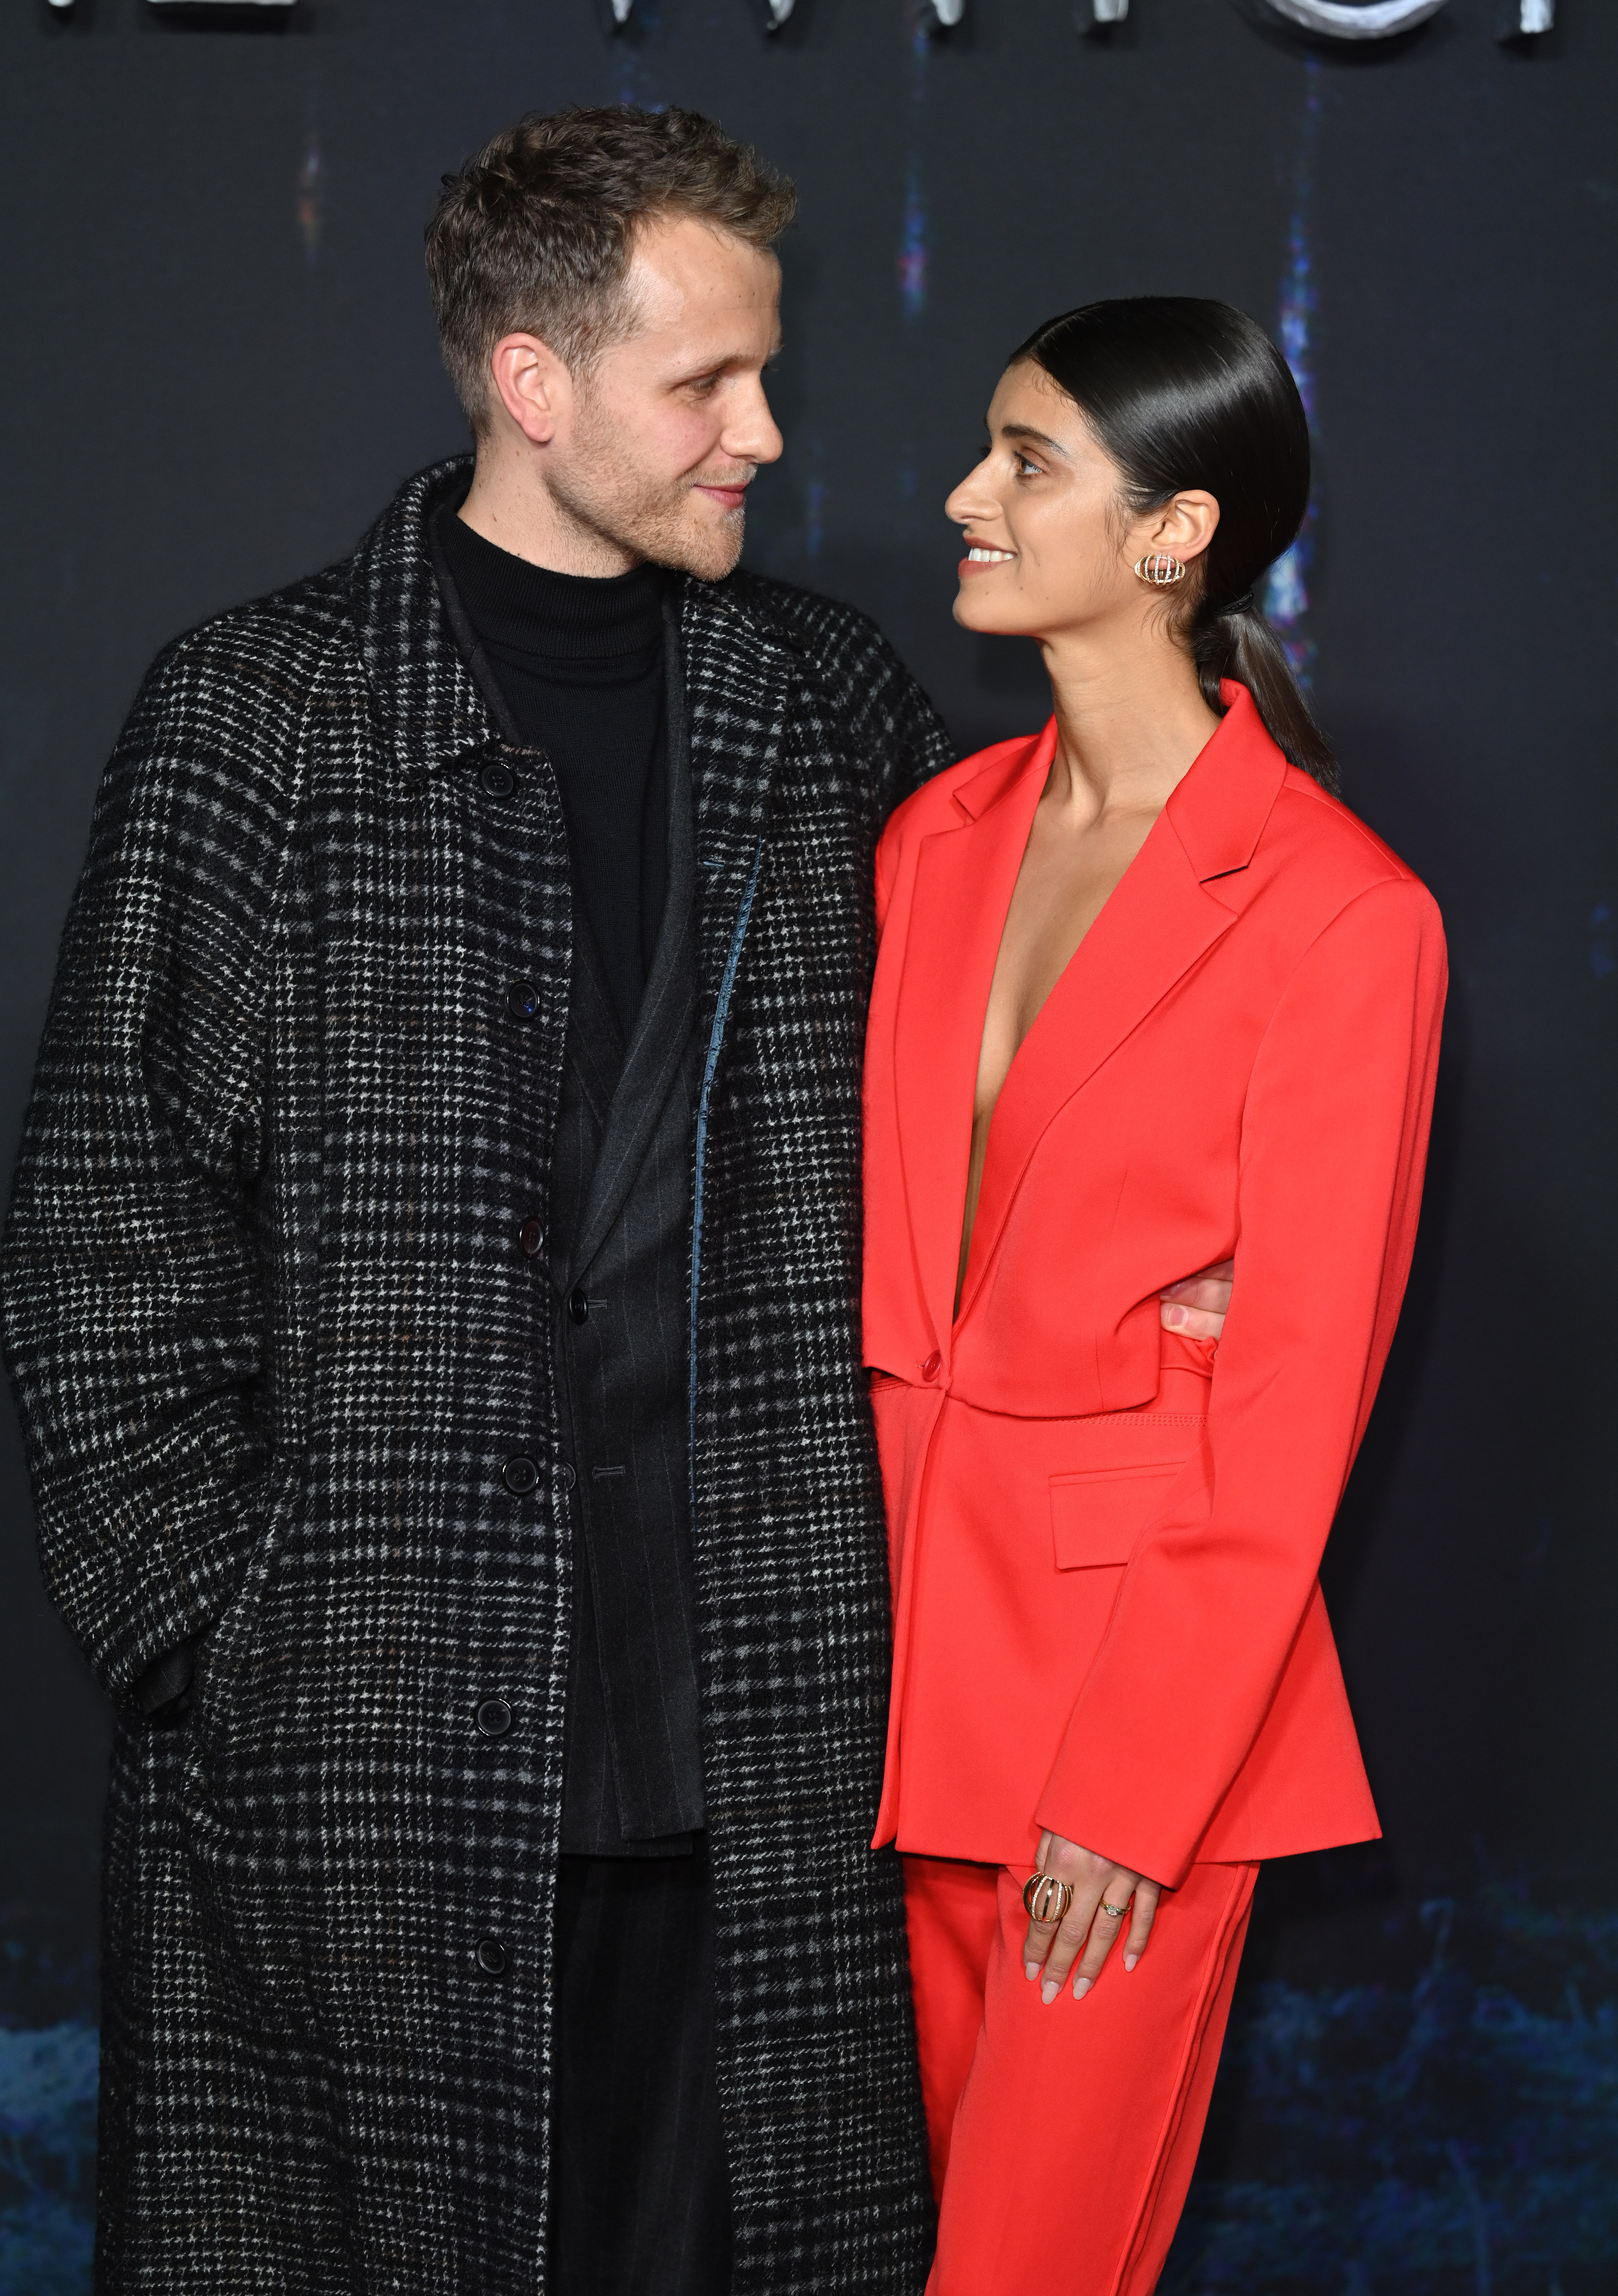 Josh Dylan and Anya Chalotra attend the world premiere of "The Witcher: Season 2" at Odeon Luxe Leicester Square, on December 1, 2021, in London, England. | Source: Getty Images